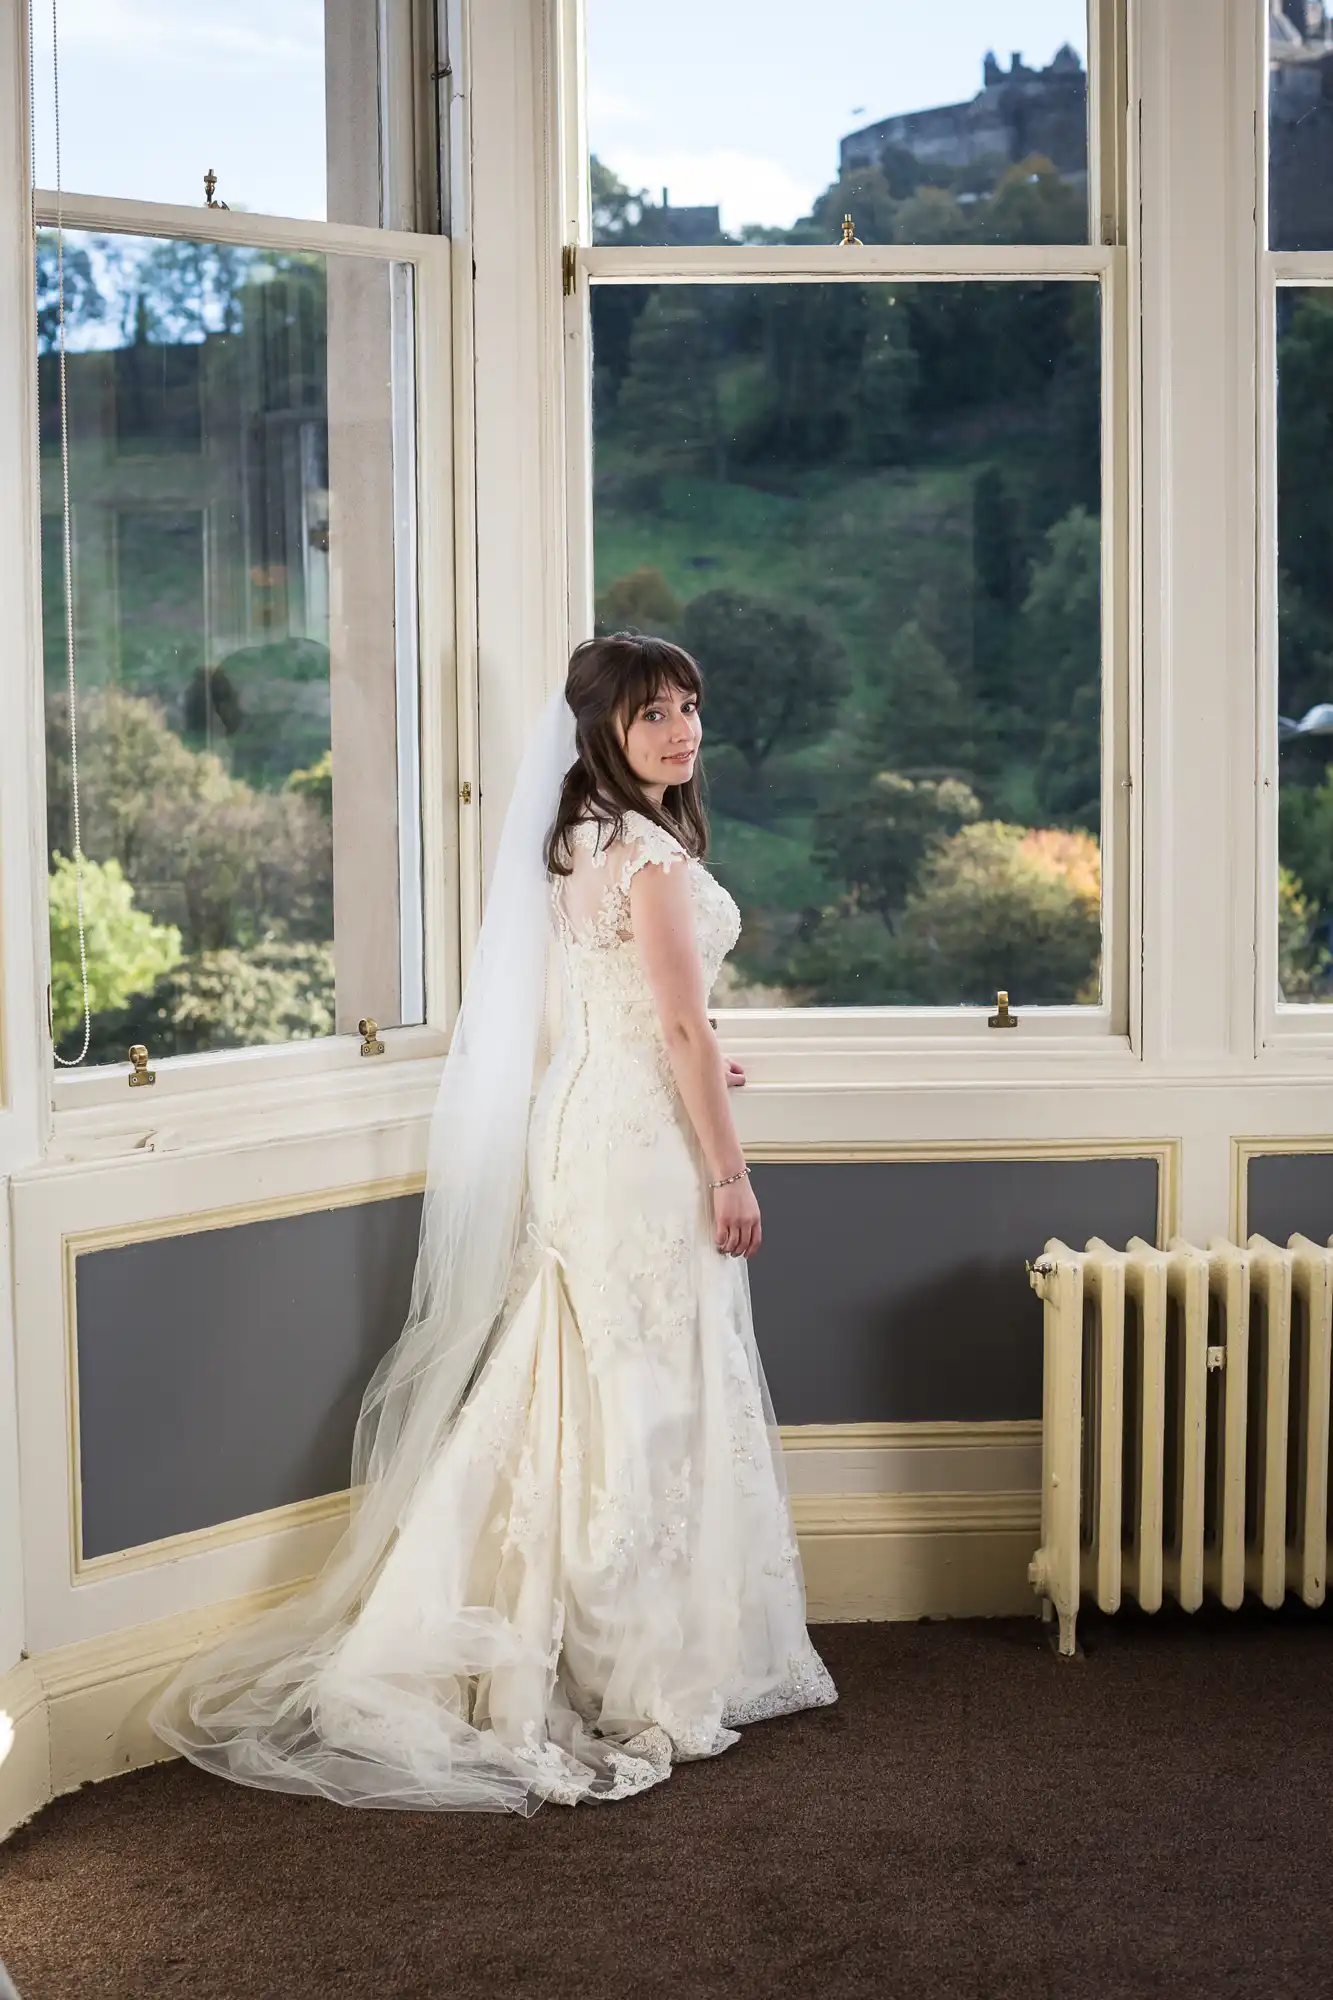 A bride in an elegant white dress stands by a window overlooking green hills, looking over her shoulder with a gentle smile.